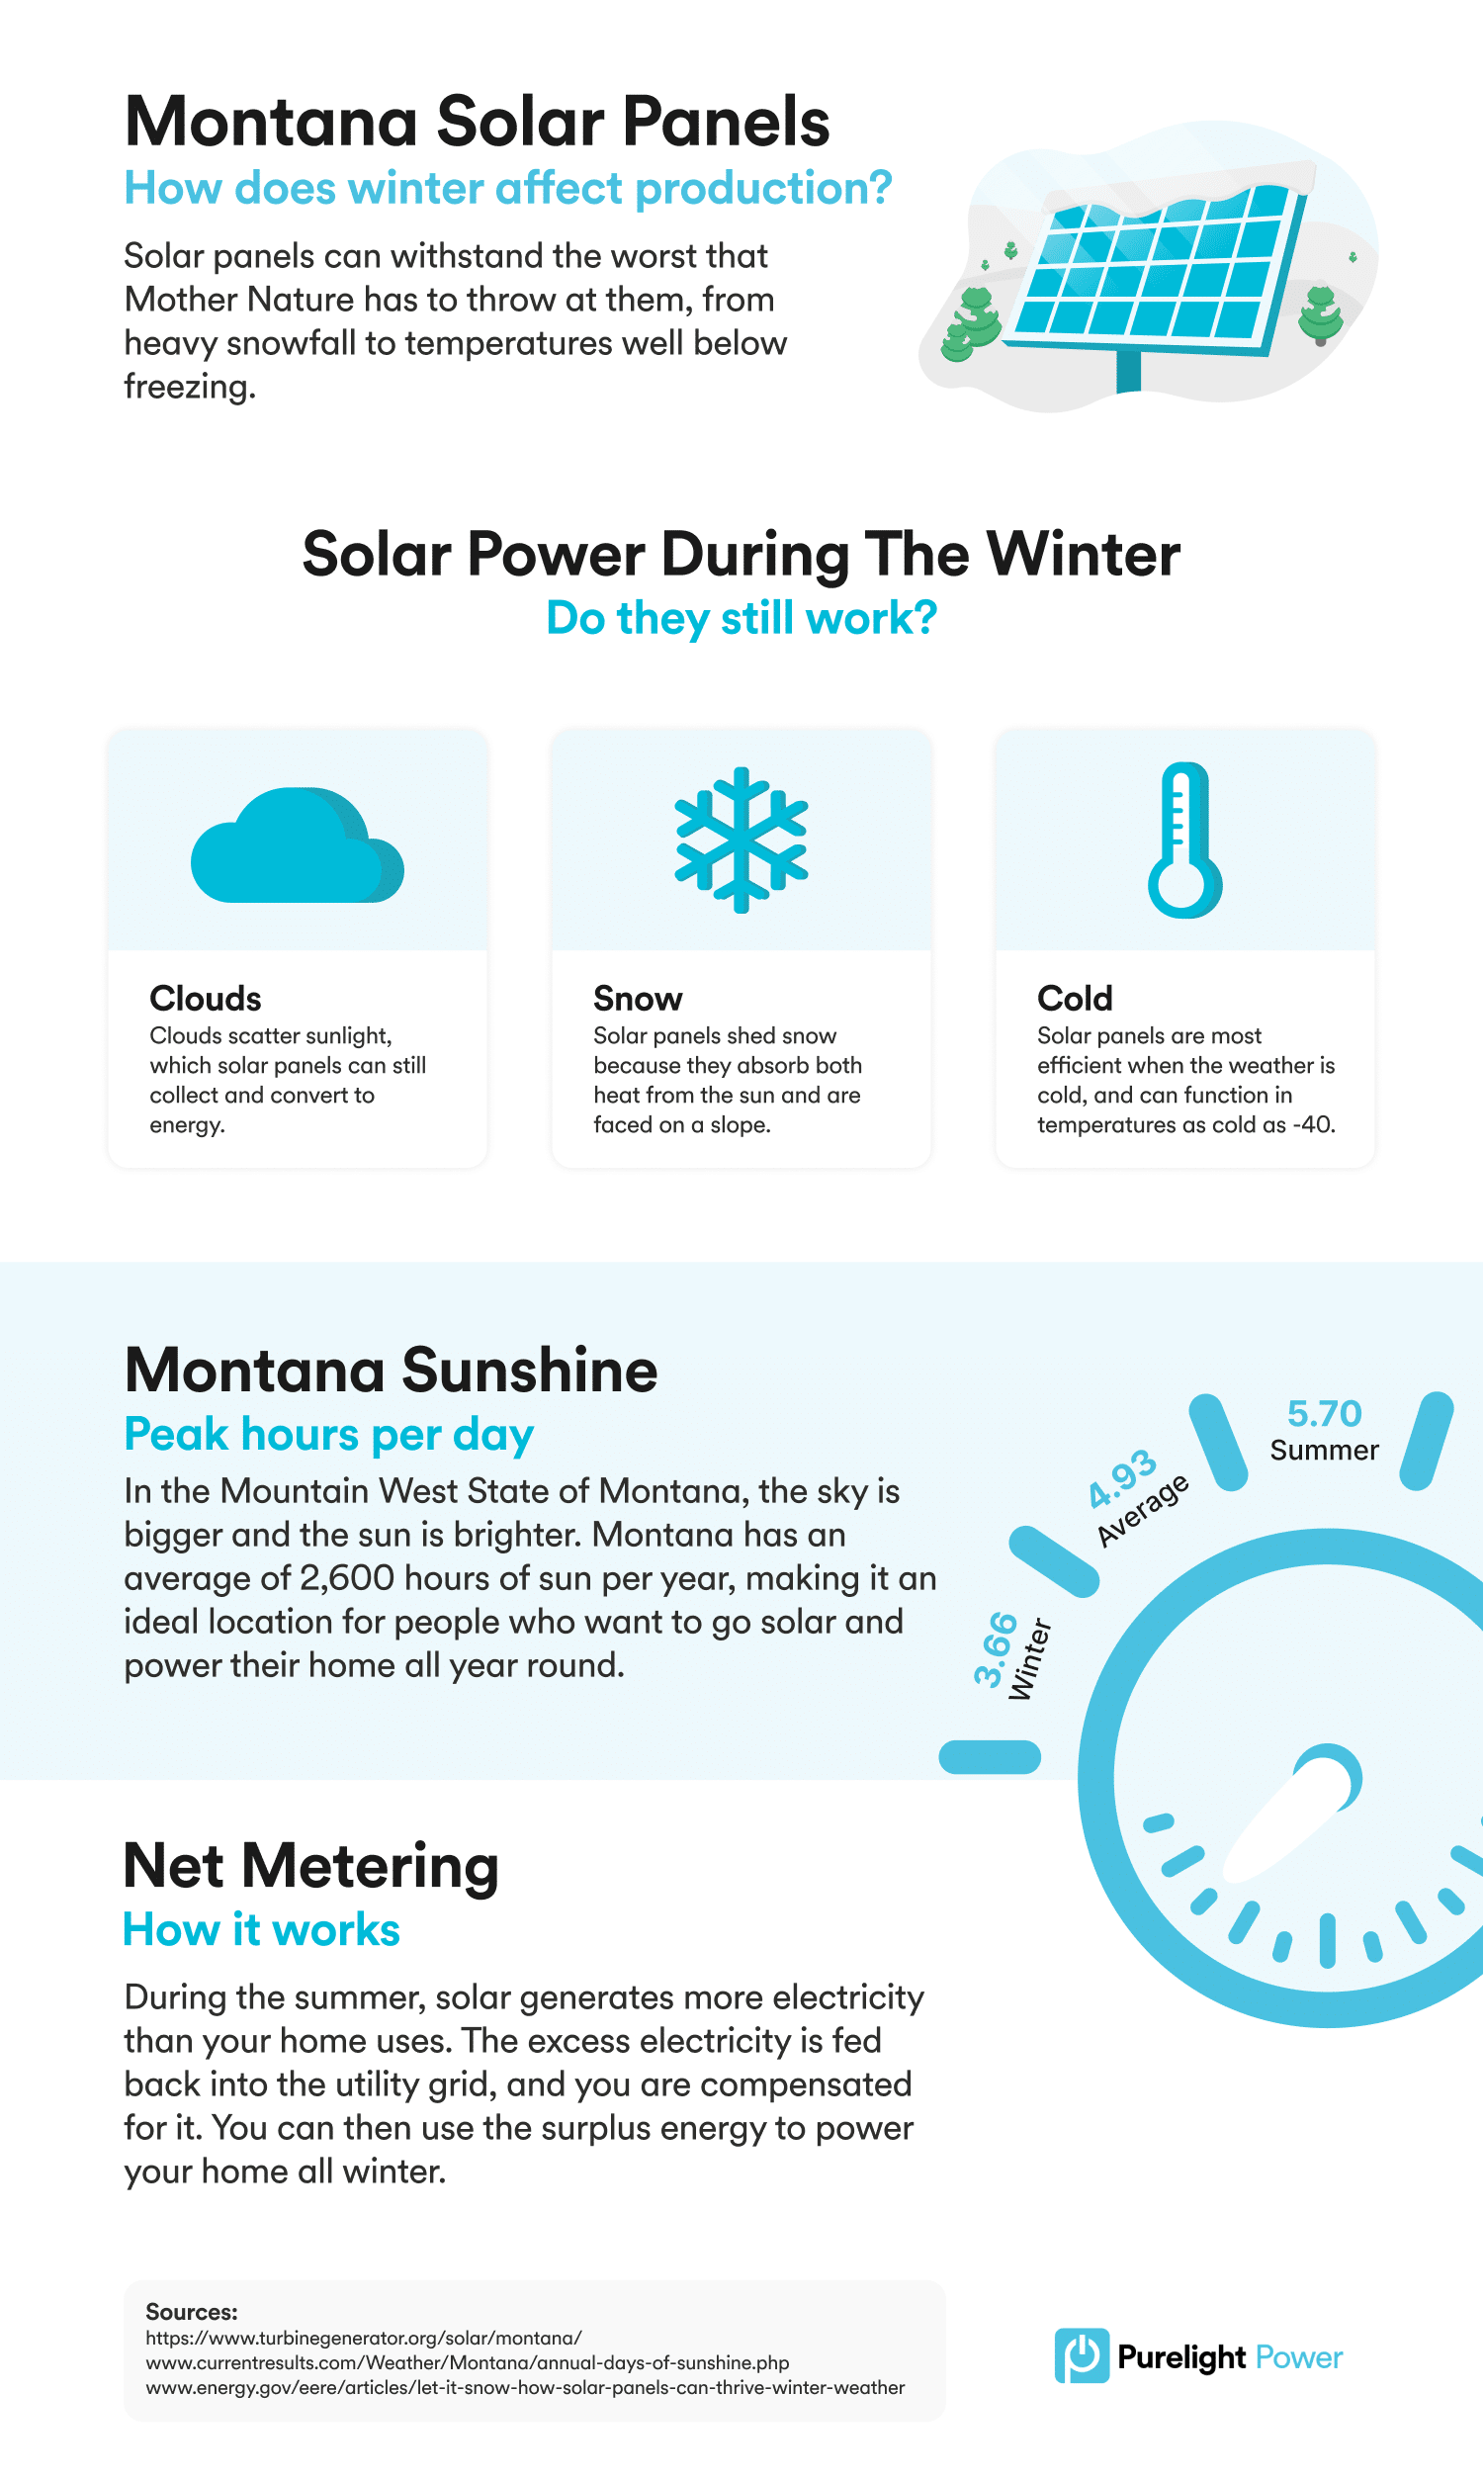 Montana solar panel production during winter